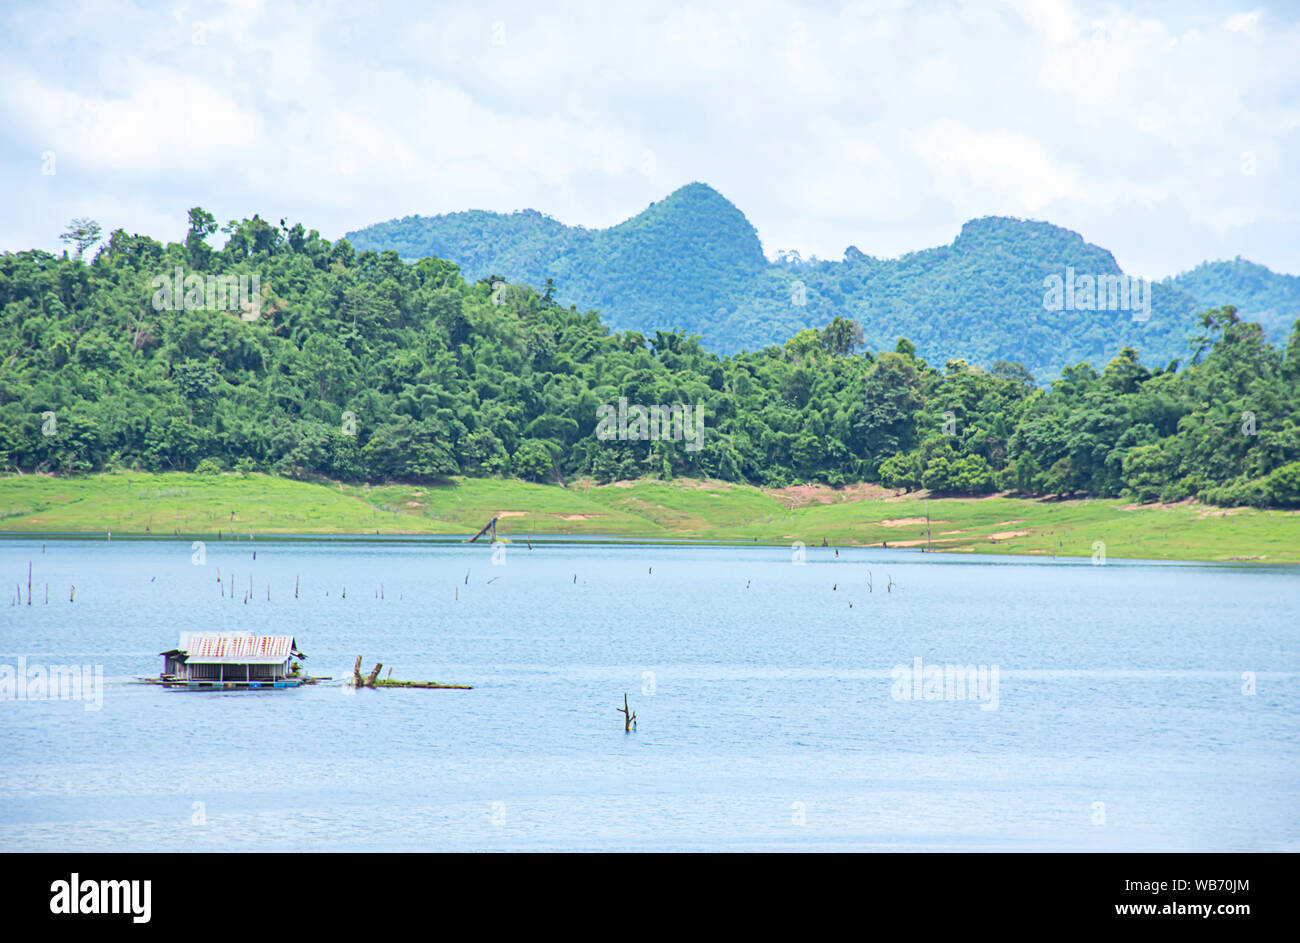 The wooden raft on the water in reservoirs and mountain views at Khao Laem National Park ,Kanchanaburi in Thailand. Stock Photo